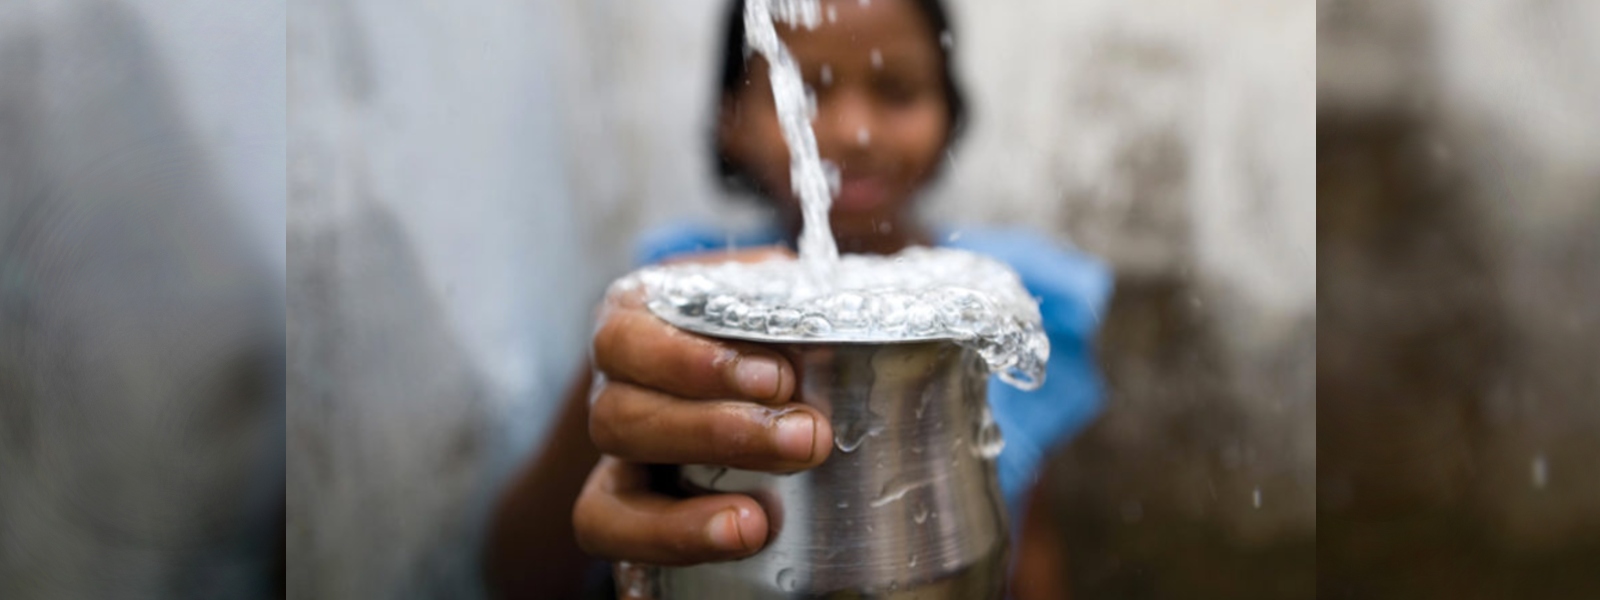 CLEAN DRINKING WATER FOR 400,000 FAMILIES BY 2025